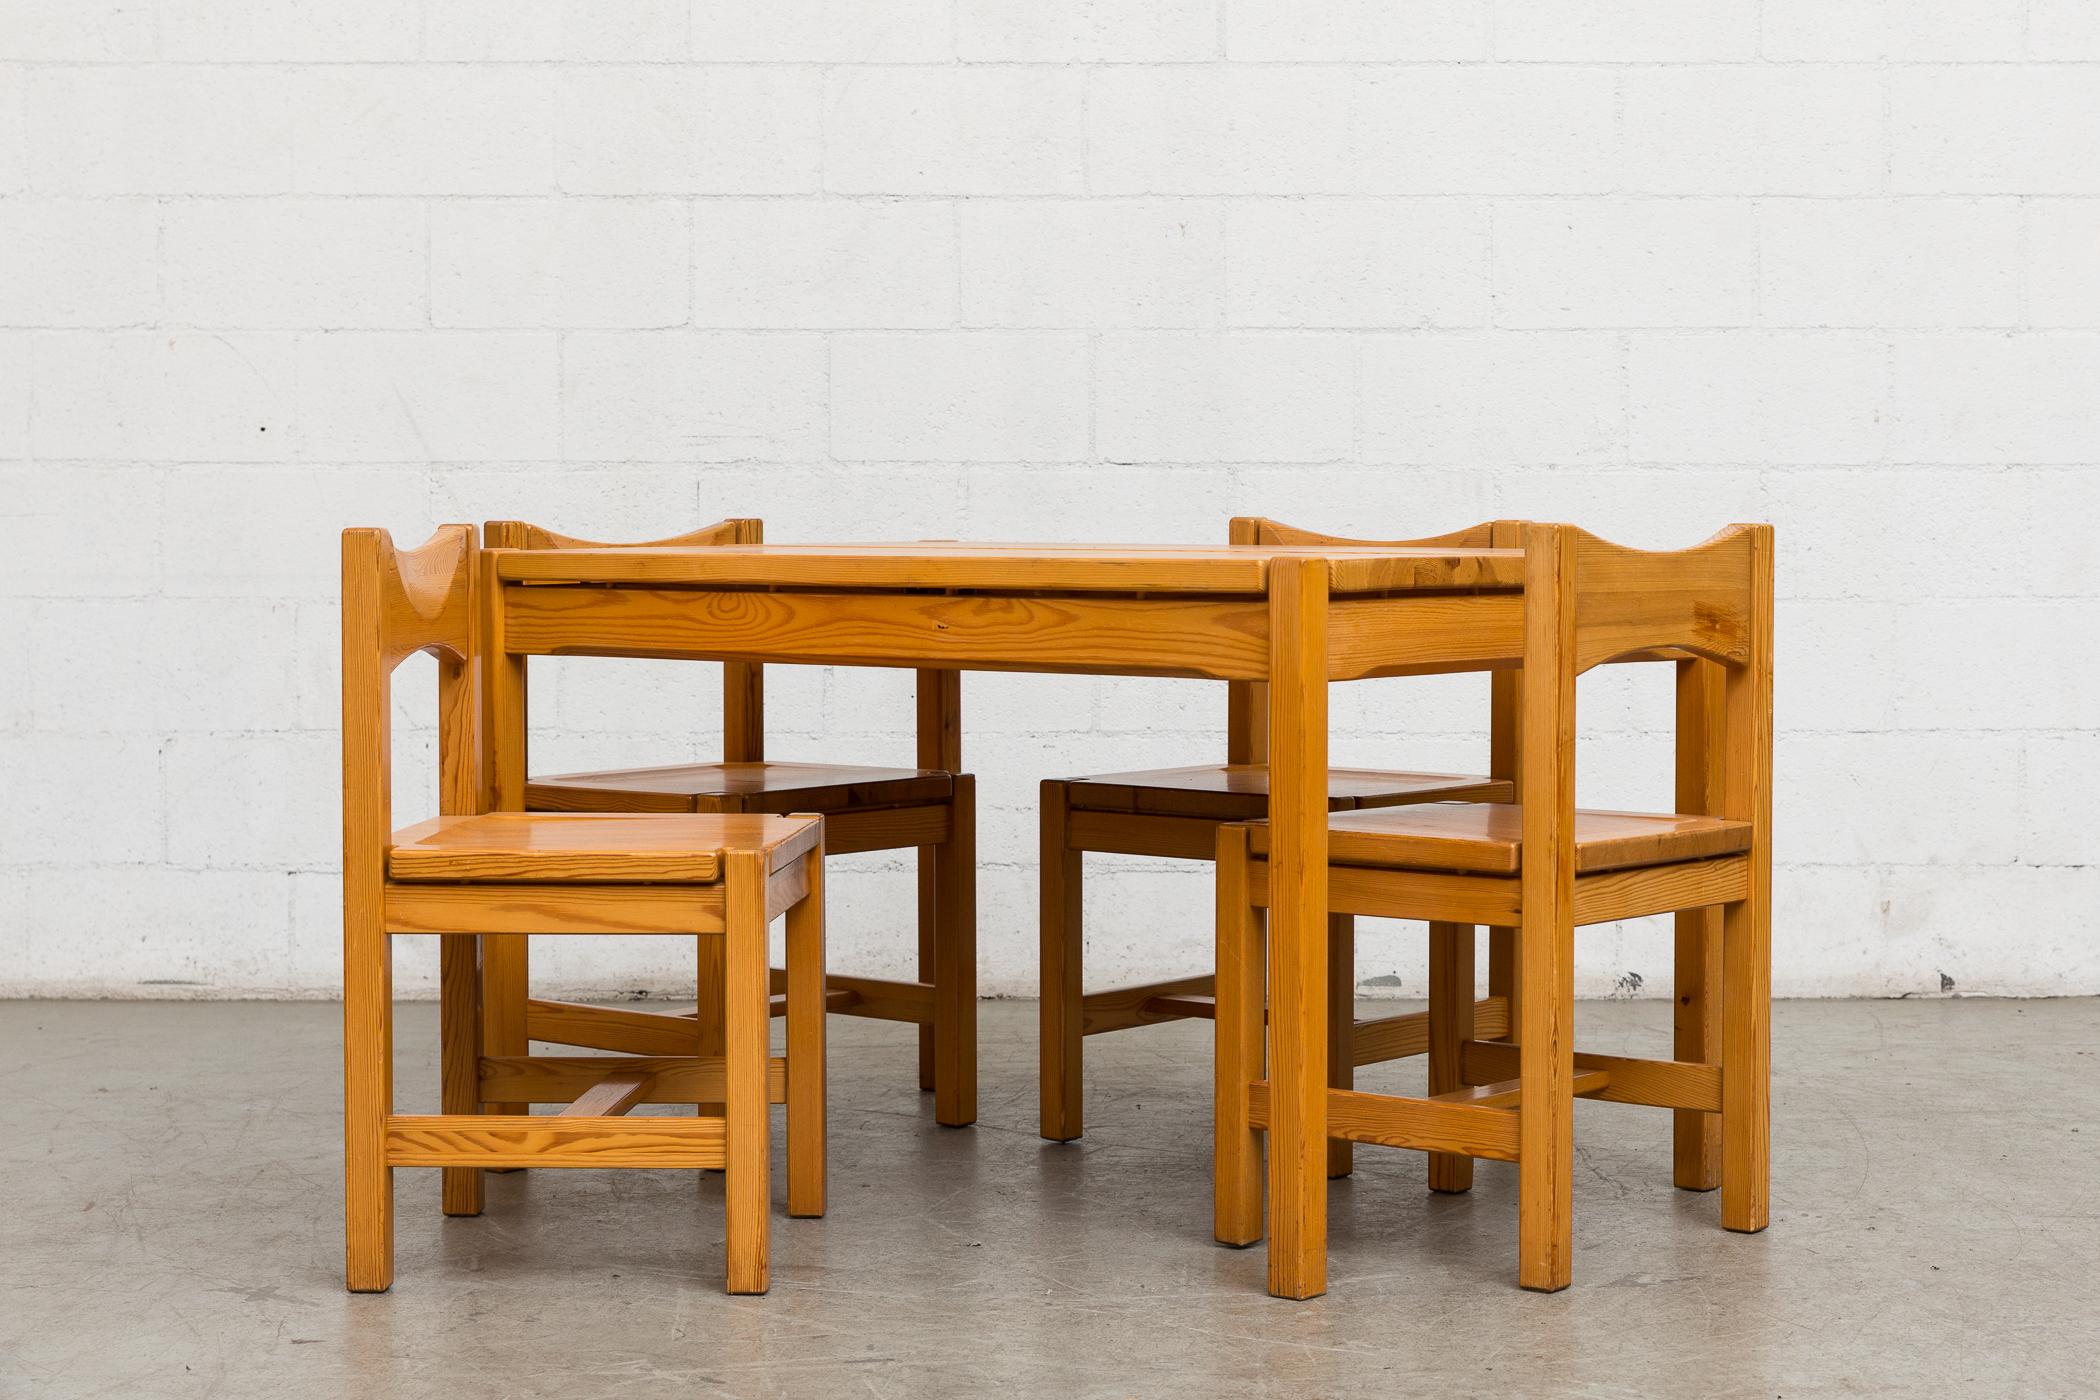 Midcentury pine dining set inspired by Ilmari Tapiovaara. Set consists of one dining table and four matching chairs. Lightly refinished. Good original condition. Set price. Chairs measure: 17.25 x 16.25 x 17/29.5.